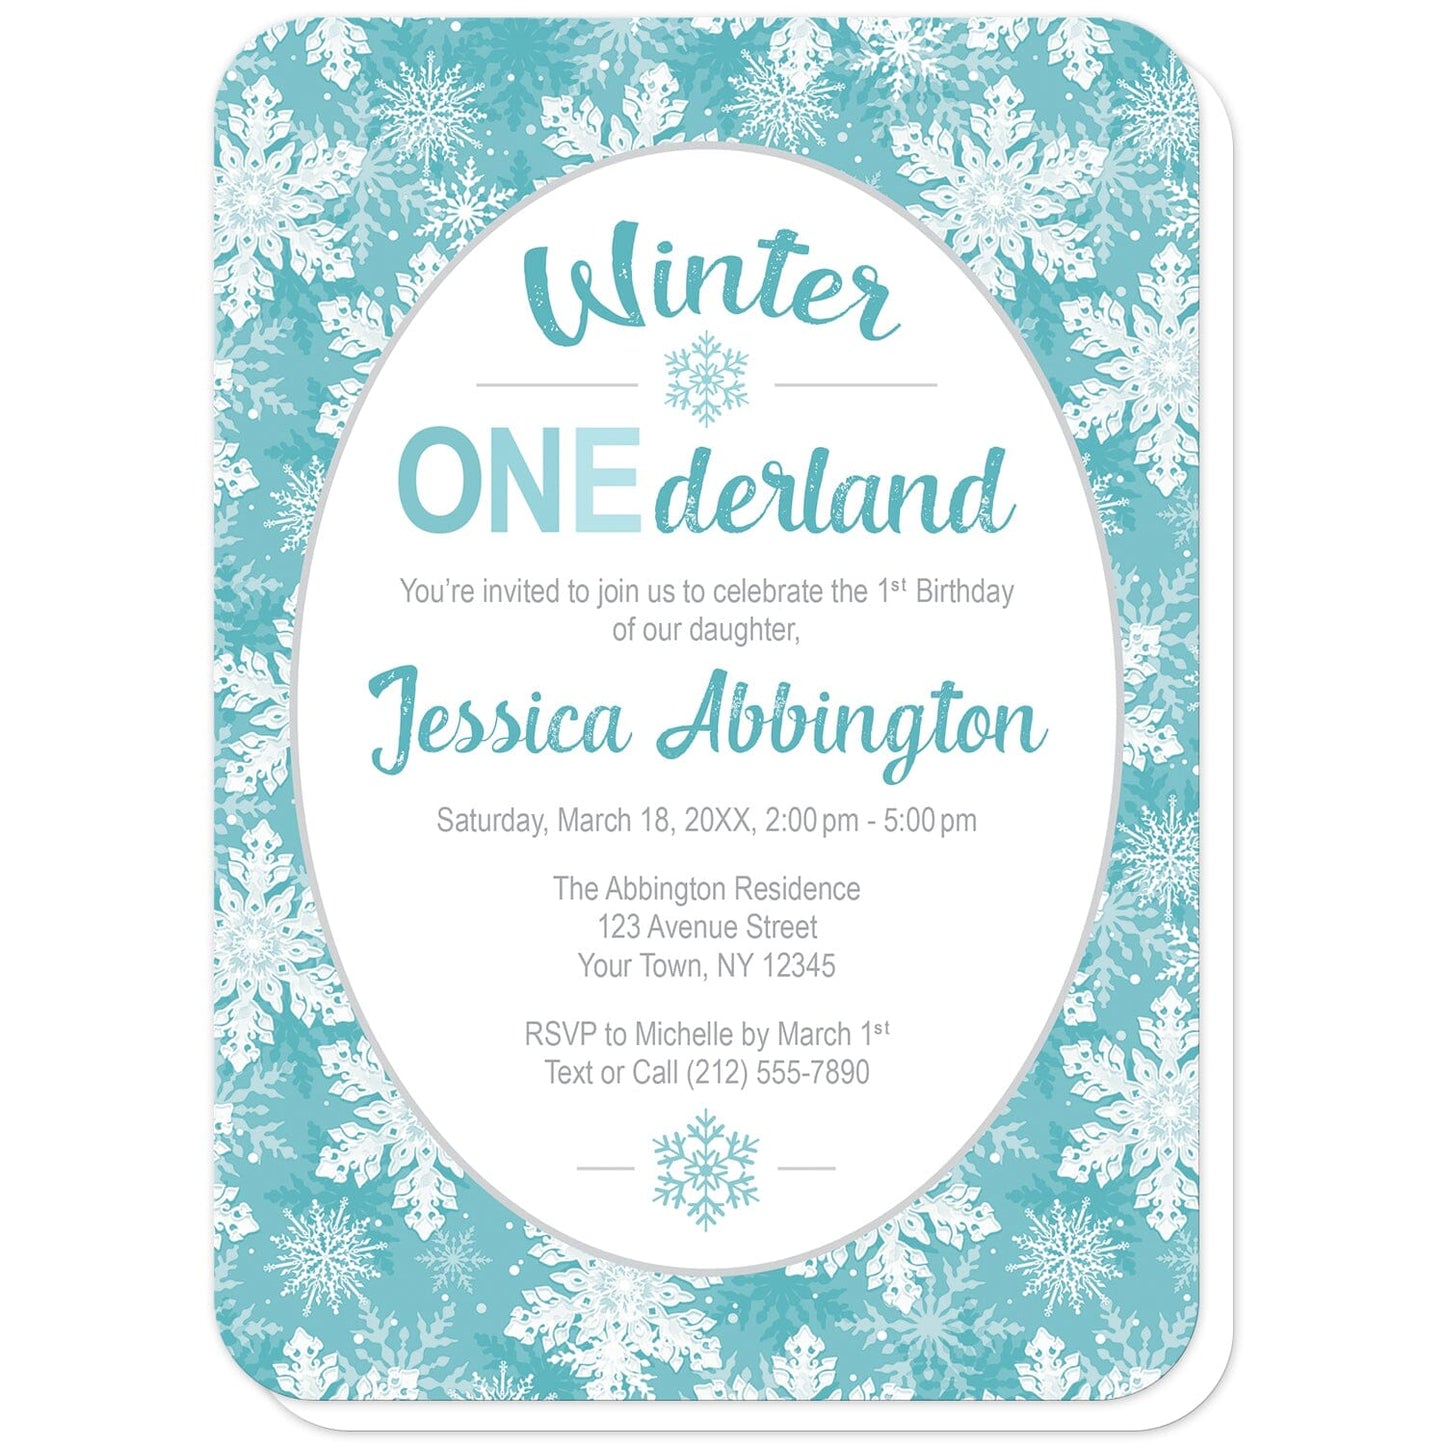 Teal Snowflake 1st Birthday Winter Onederland Invitations (with rounded corners) at Artistically Invited. Beautifully ornate teal snowflake 1st birthday Winter Onederland invitations designed with your personalized 1st birthday party details custom printed in teal and gray in a white oval frame design over a pretty teal, turquoise, and white snowflake pattern background.